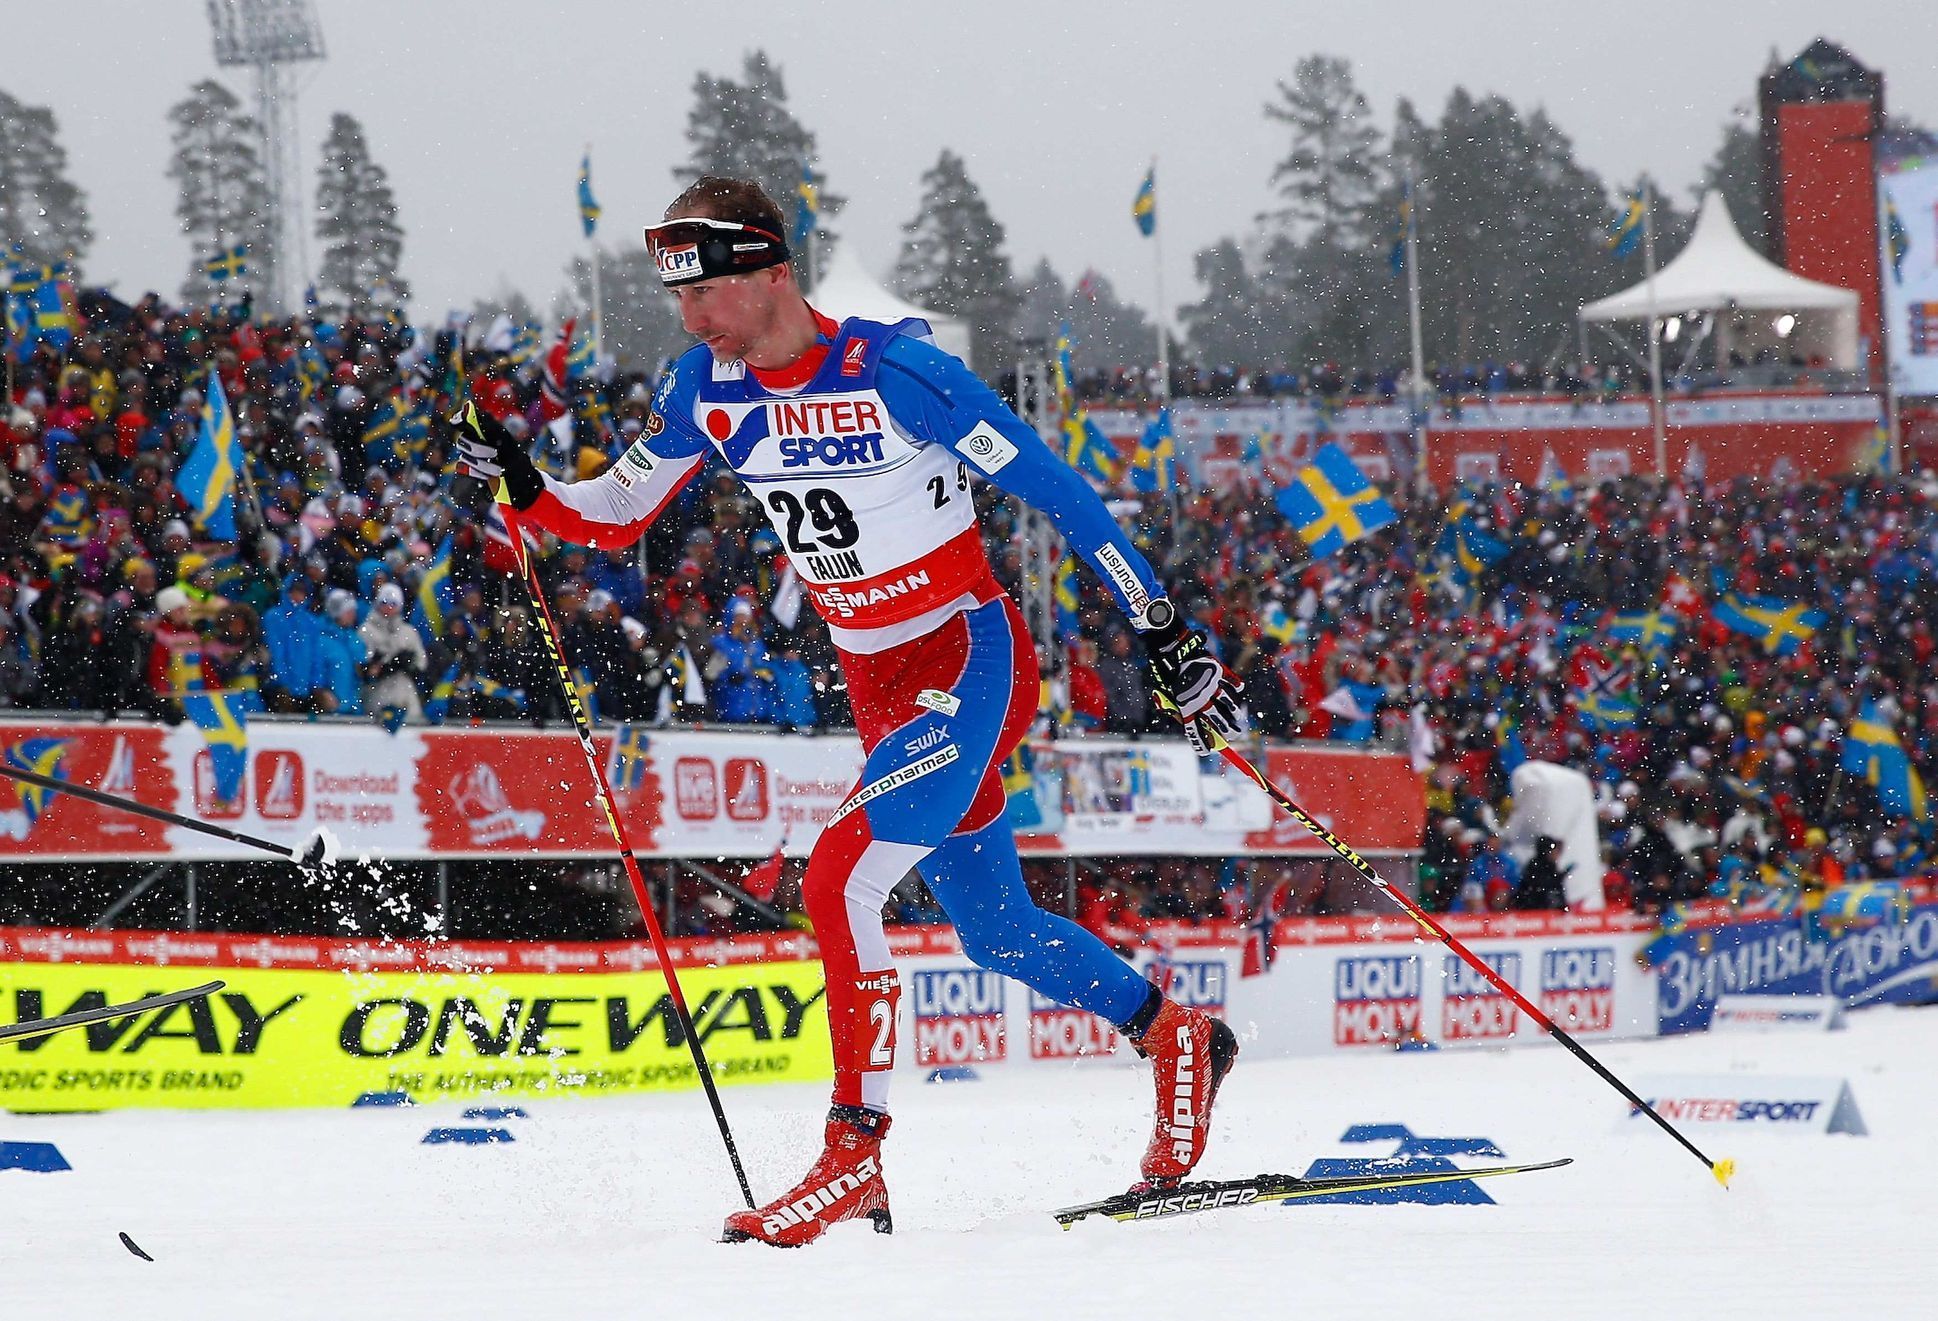 Bauer of the Czech Republic competes in the men's cross country 50 km mass start classic race during heavy snowfall at the Nordic World Ski Championships in Falun